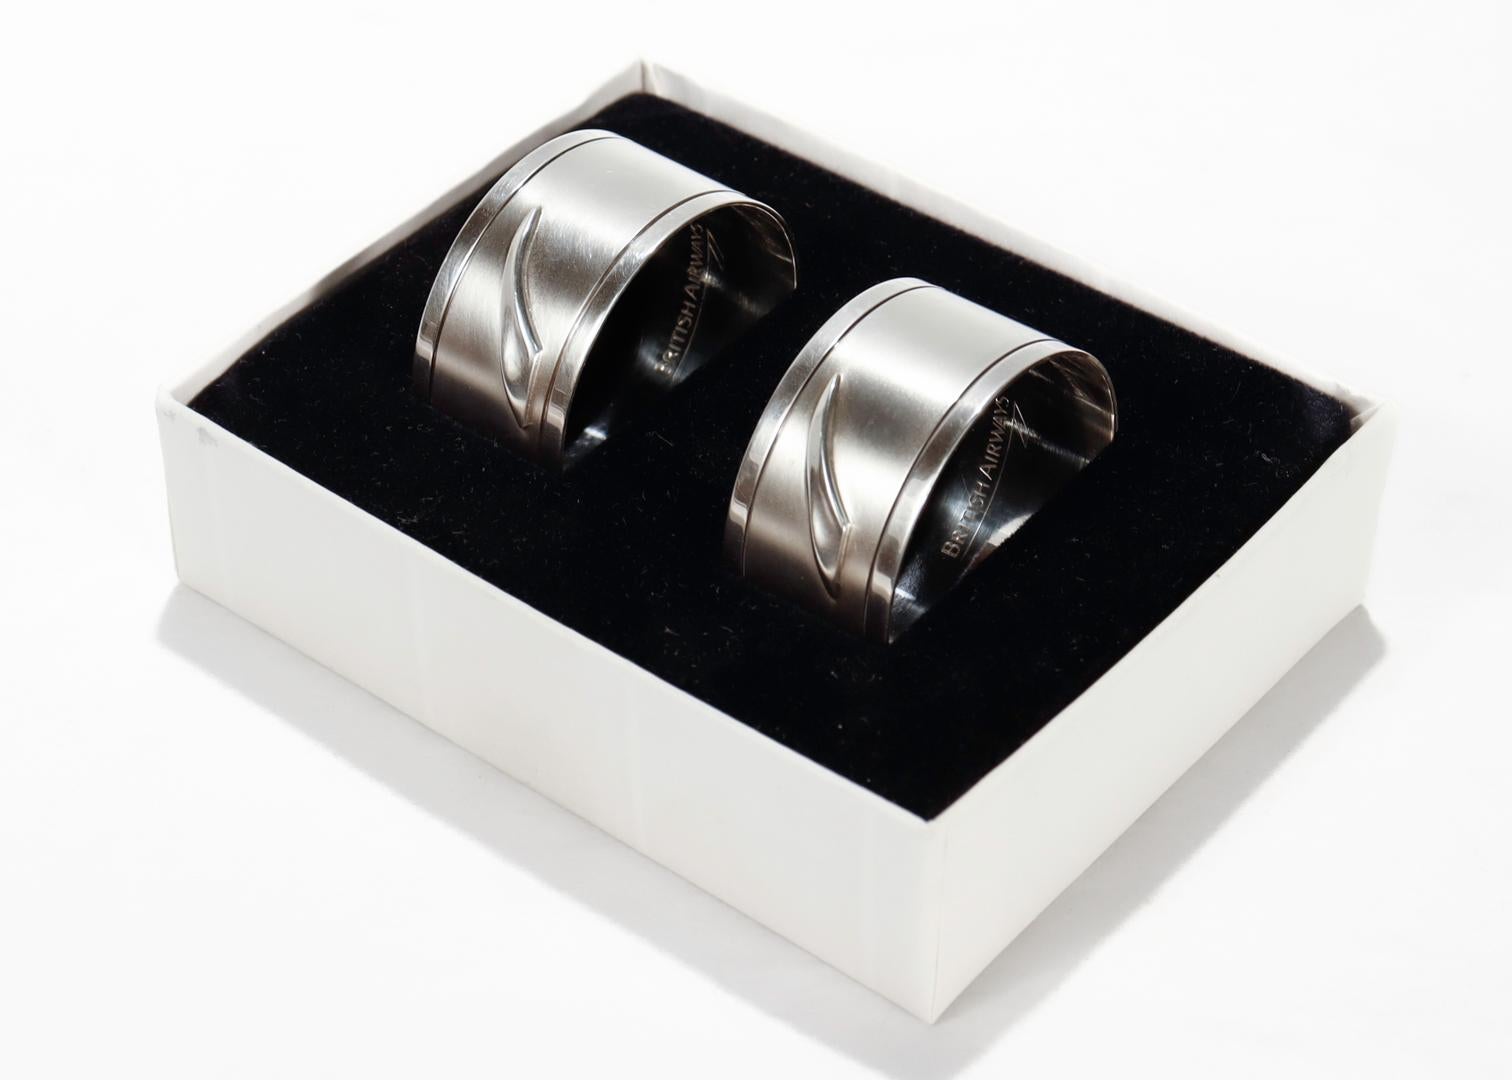 A fine pair of English sterling silver napkin rings.

Made for the Concorde supersonic airliner division of British Airways.

Fully hallmarked to the back British Airways / London / Sterling / 1992

Simply a wonderful pair of collectible Concorde